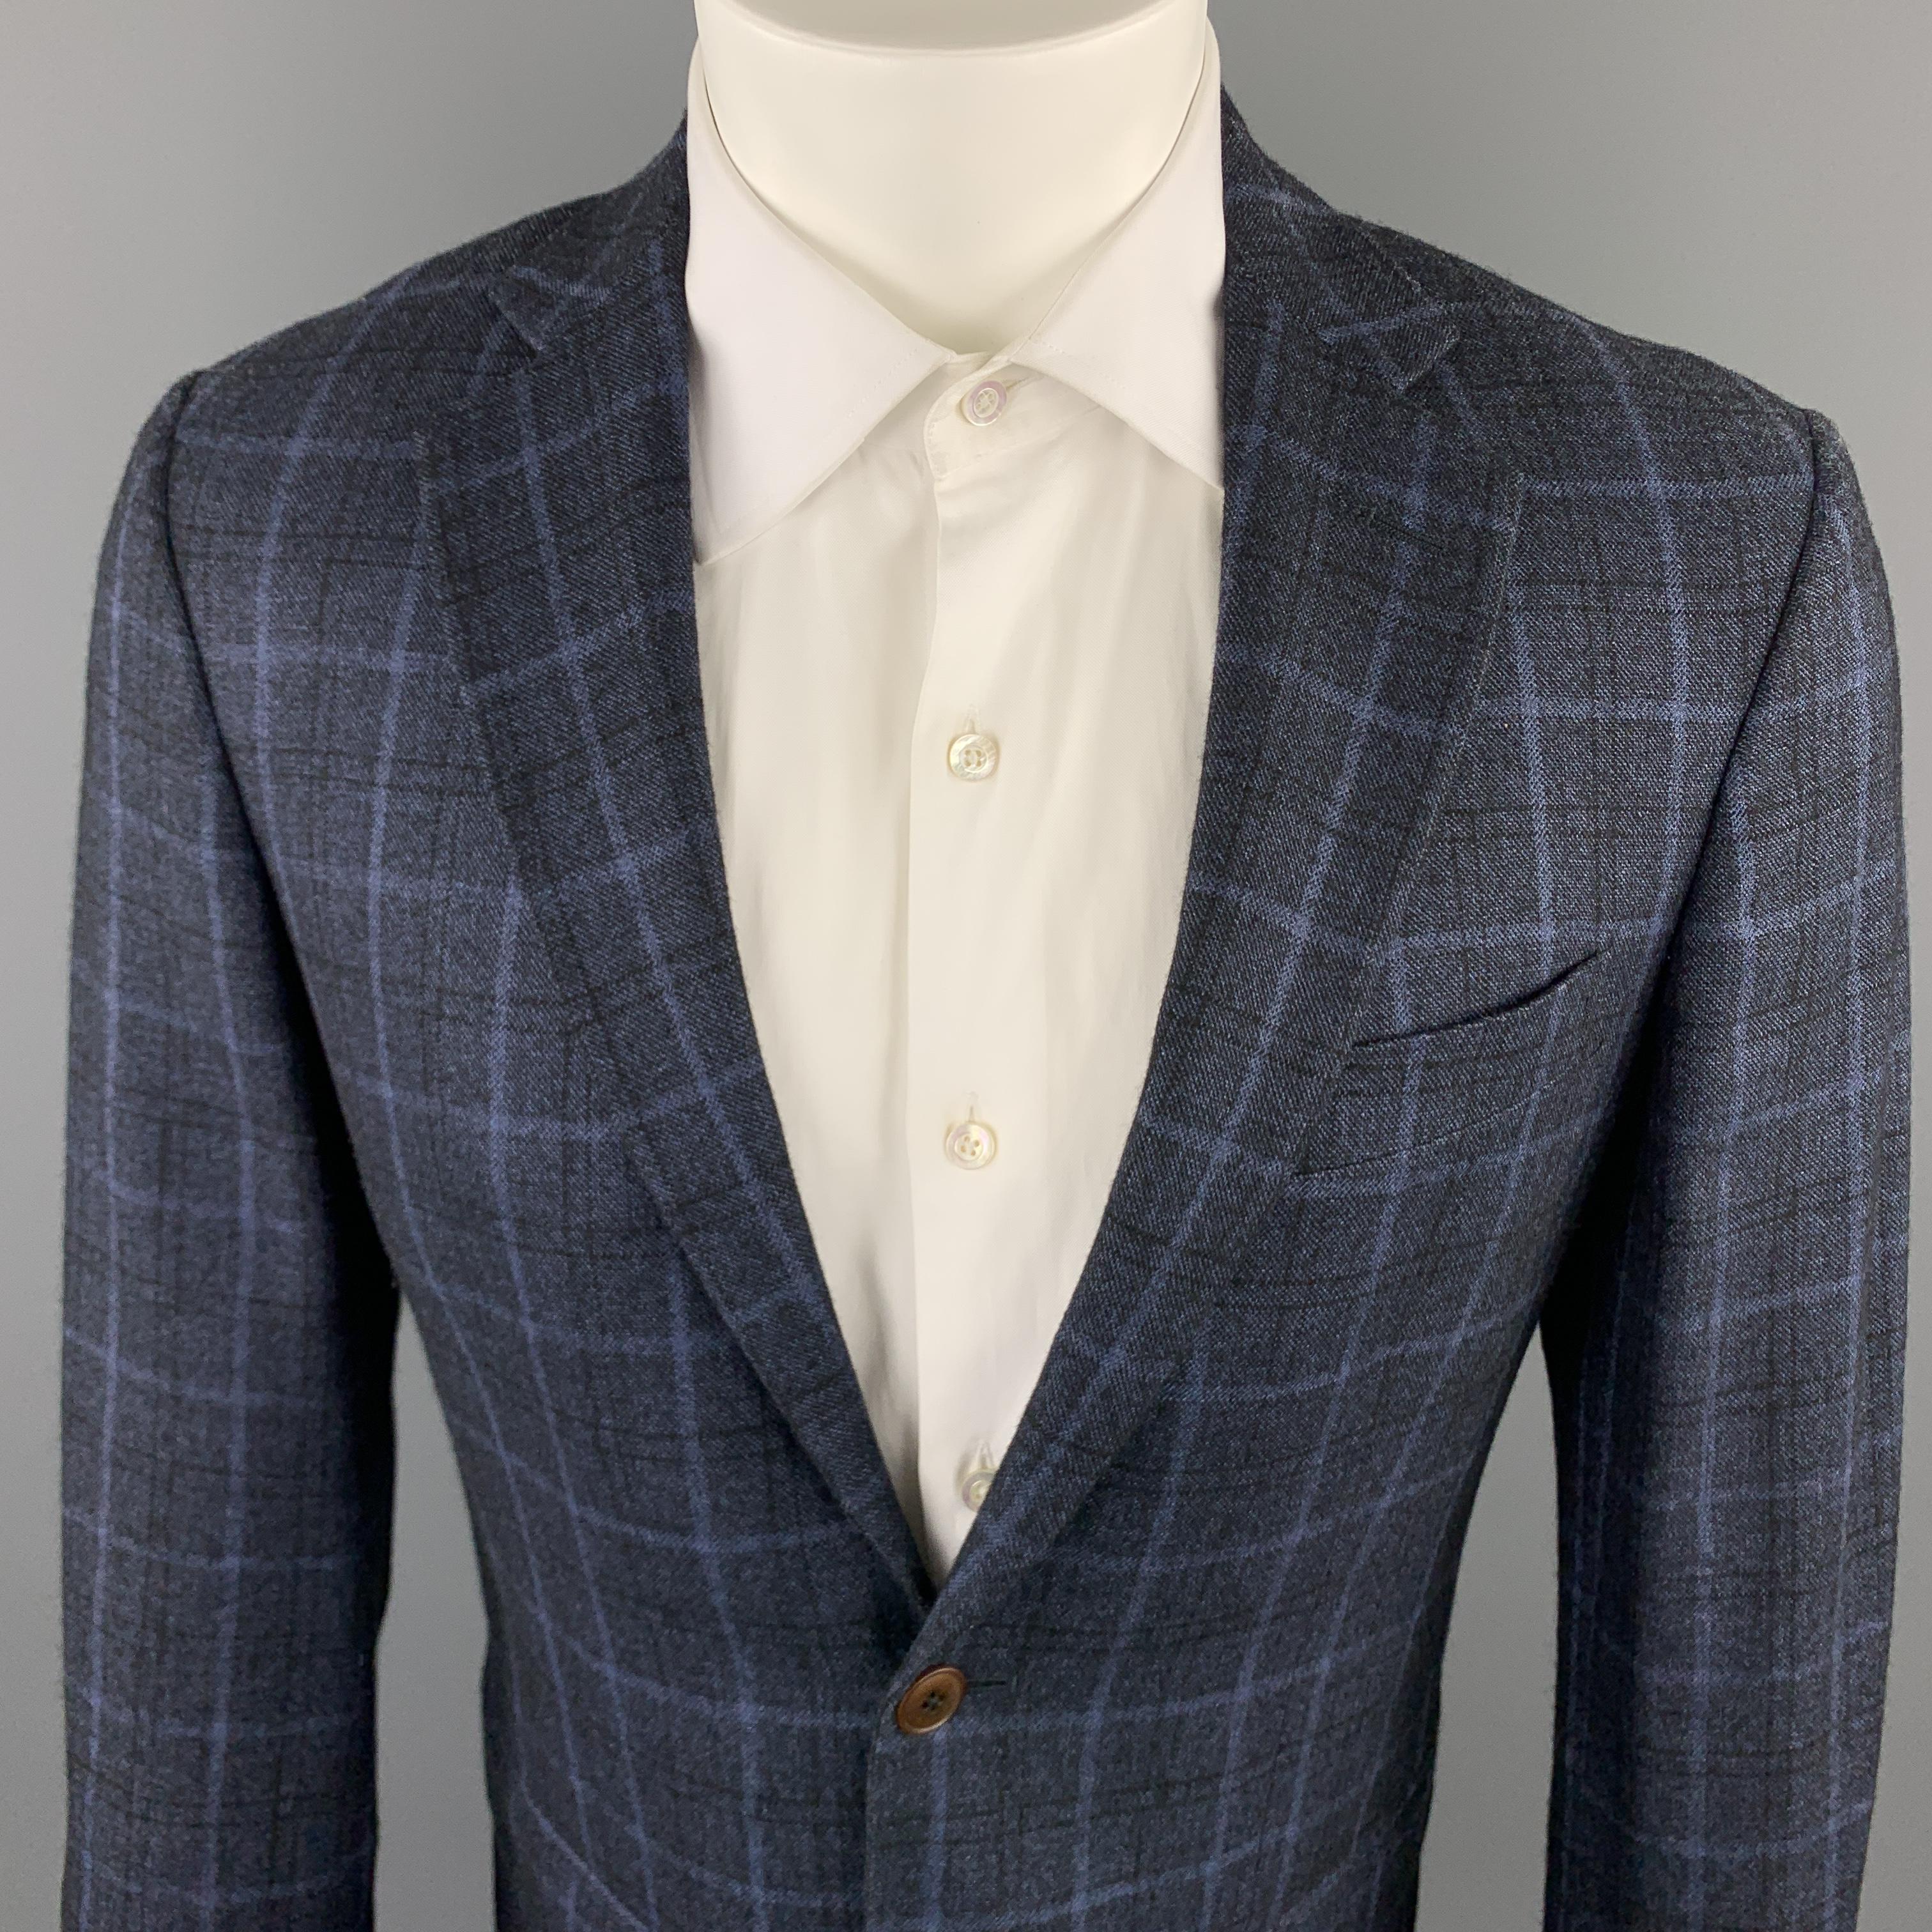 CARSON STREET sport coat comes in a plaid wool blend material, featuring a notch lapel, two buttons at closure, buttoned cuffs, and a double vent at back. Made in Italy. 

Excellent Pre-Owned Condition.
Marked: 48R

Measurements:

Shoulder: 17 in.